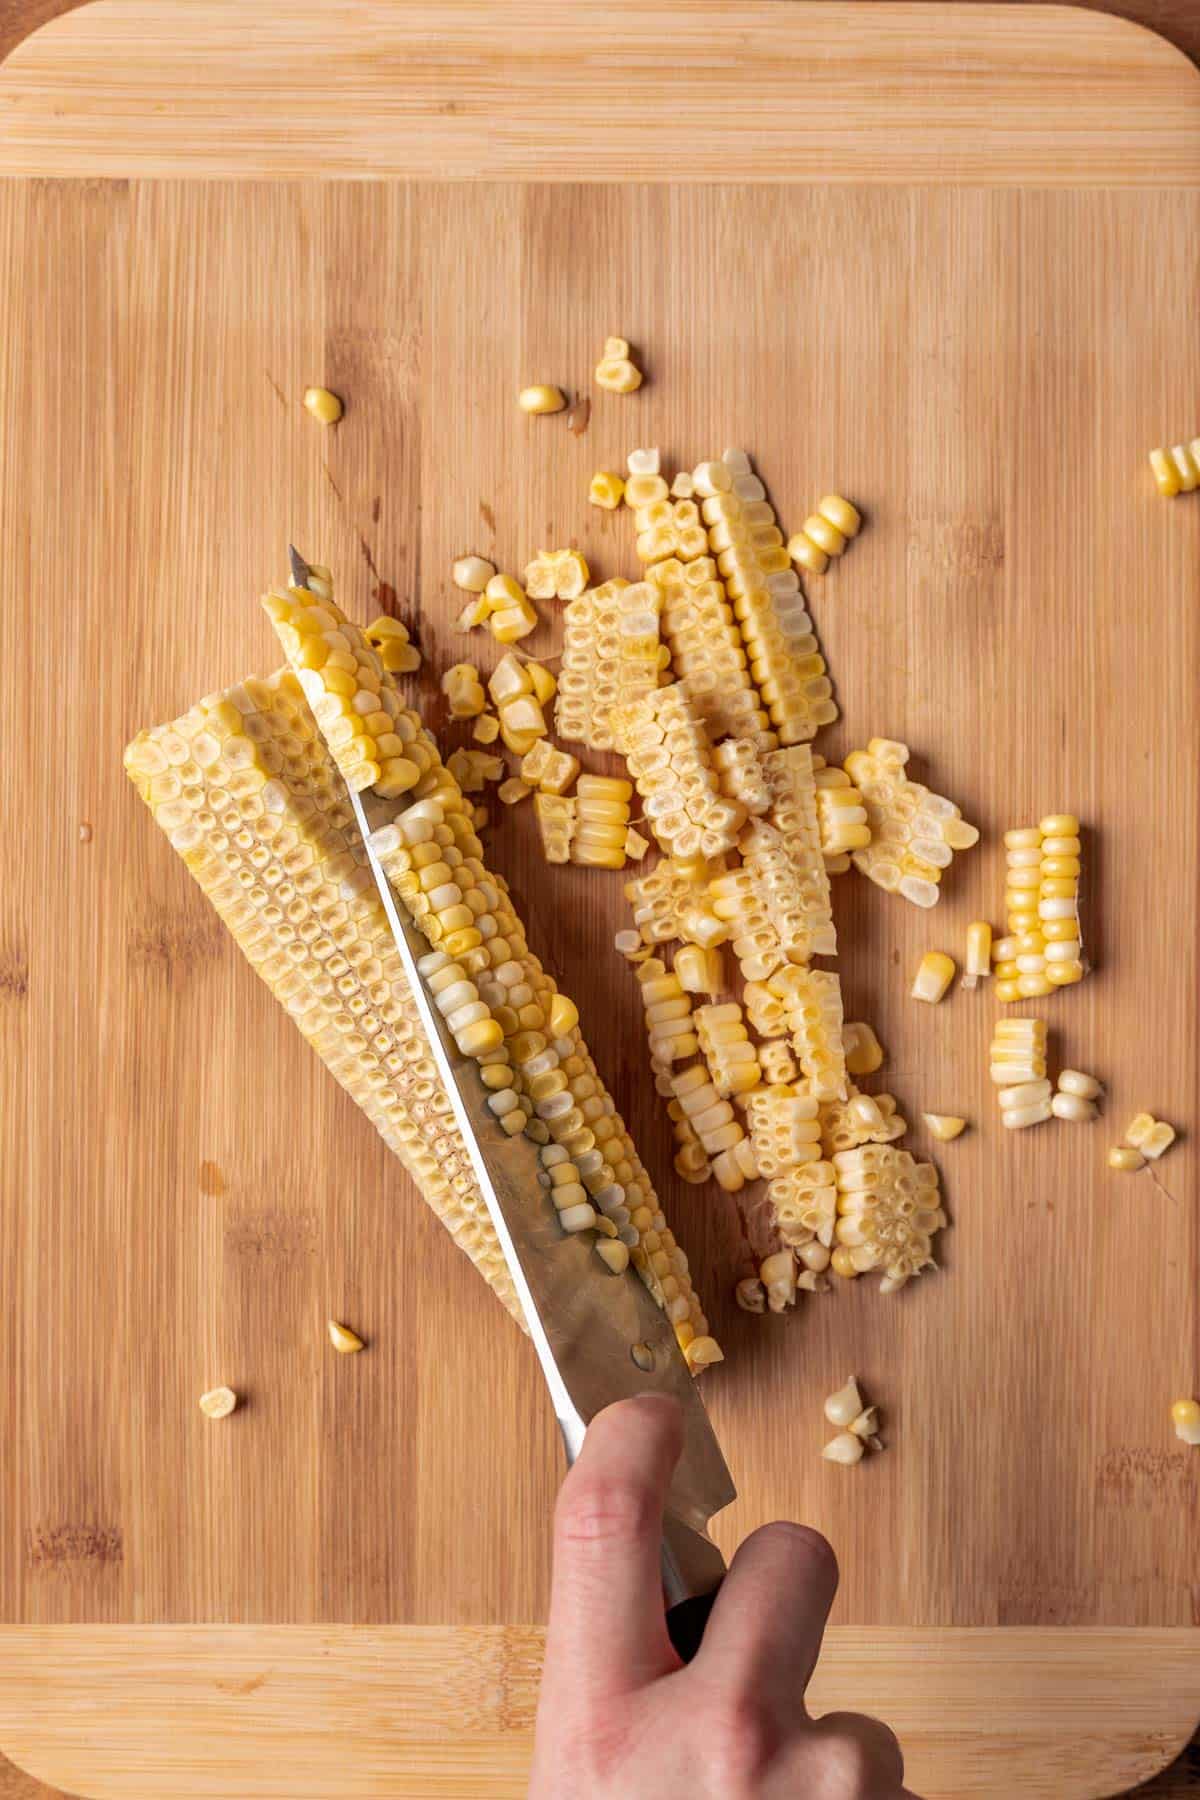 A chef's knife cutting the rest of the corn off the cob.